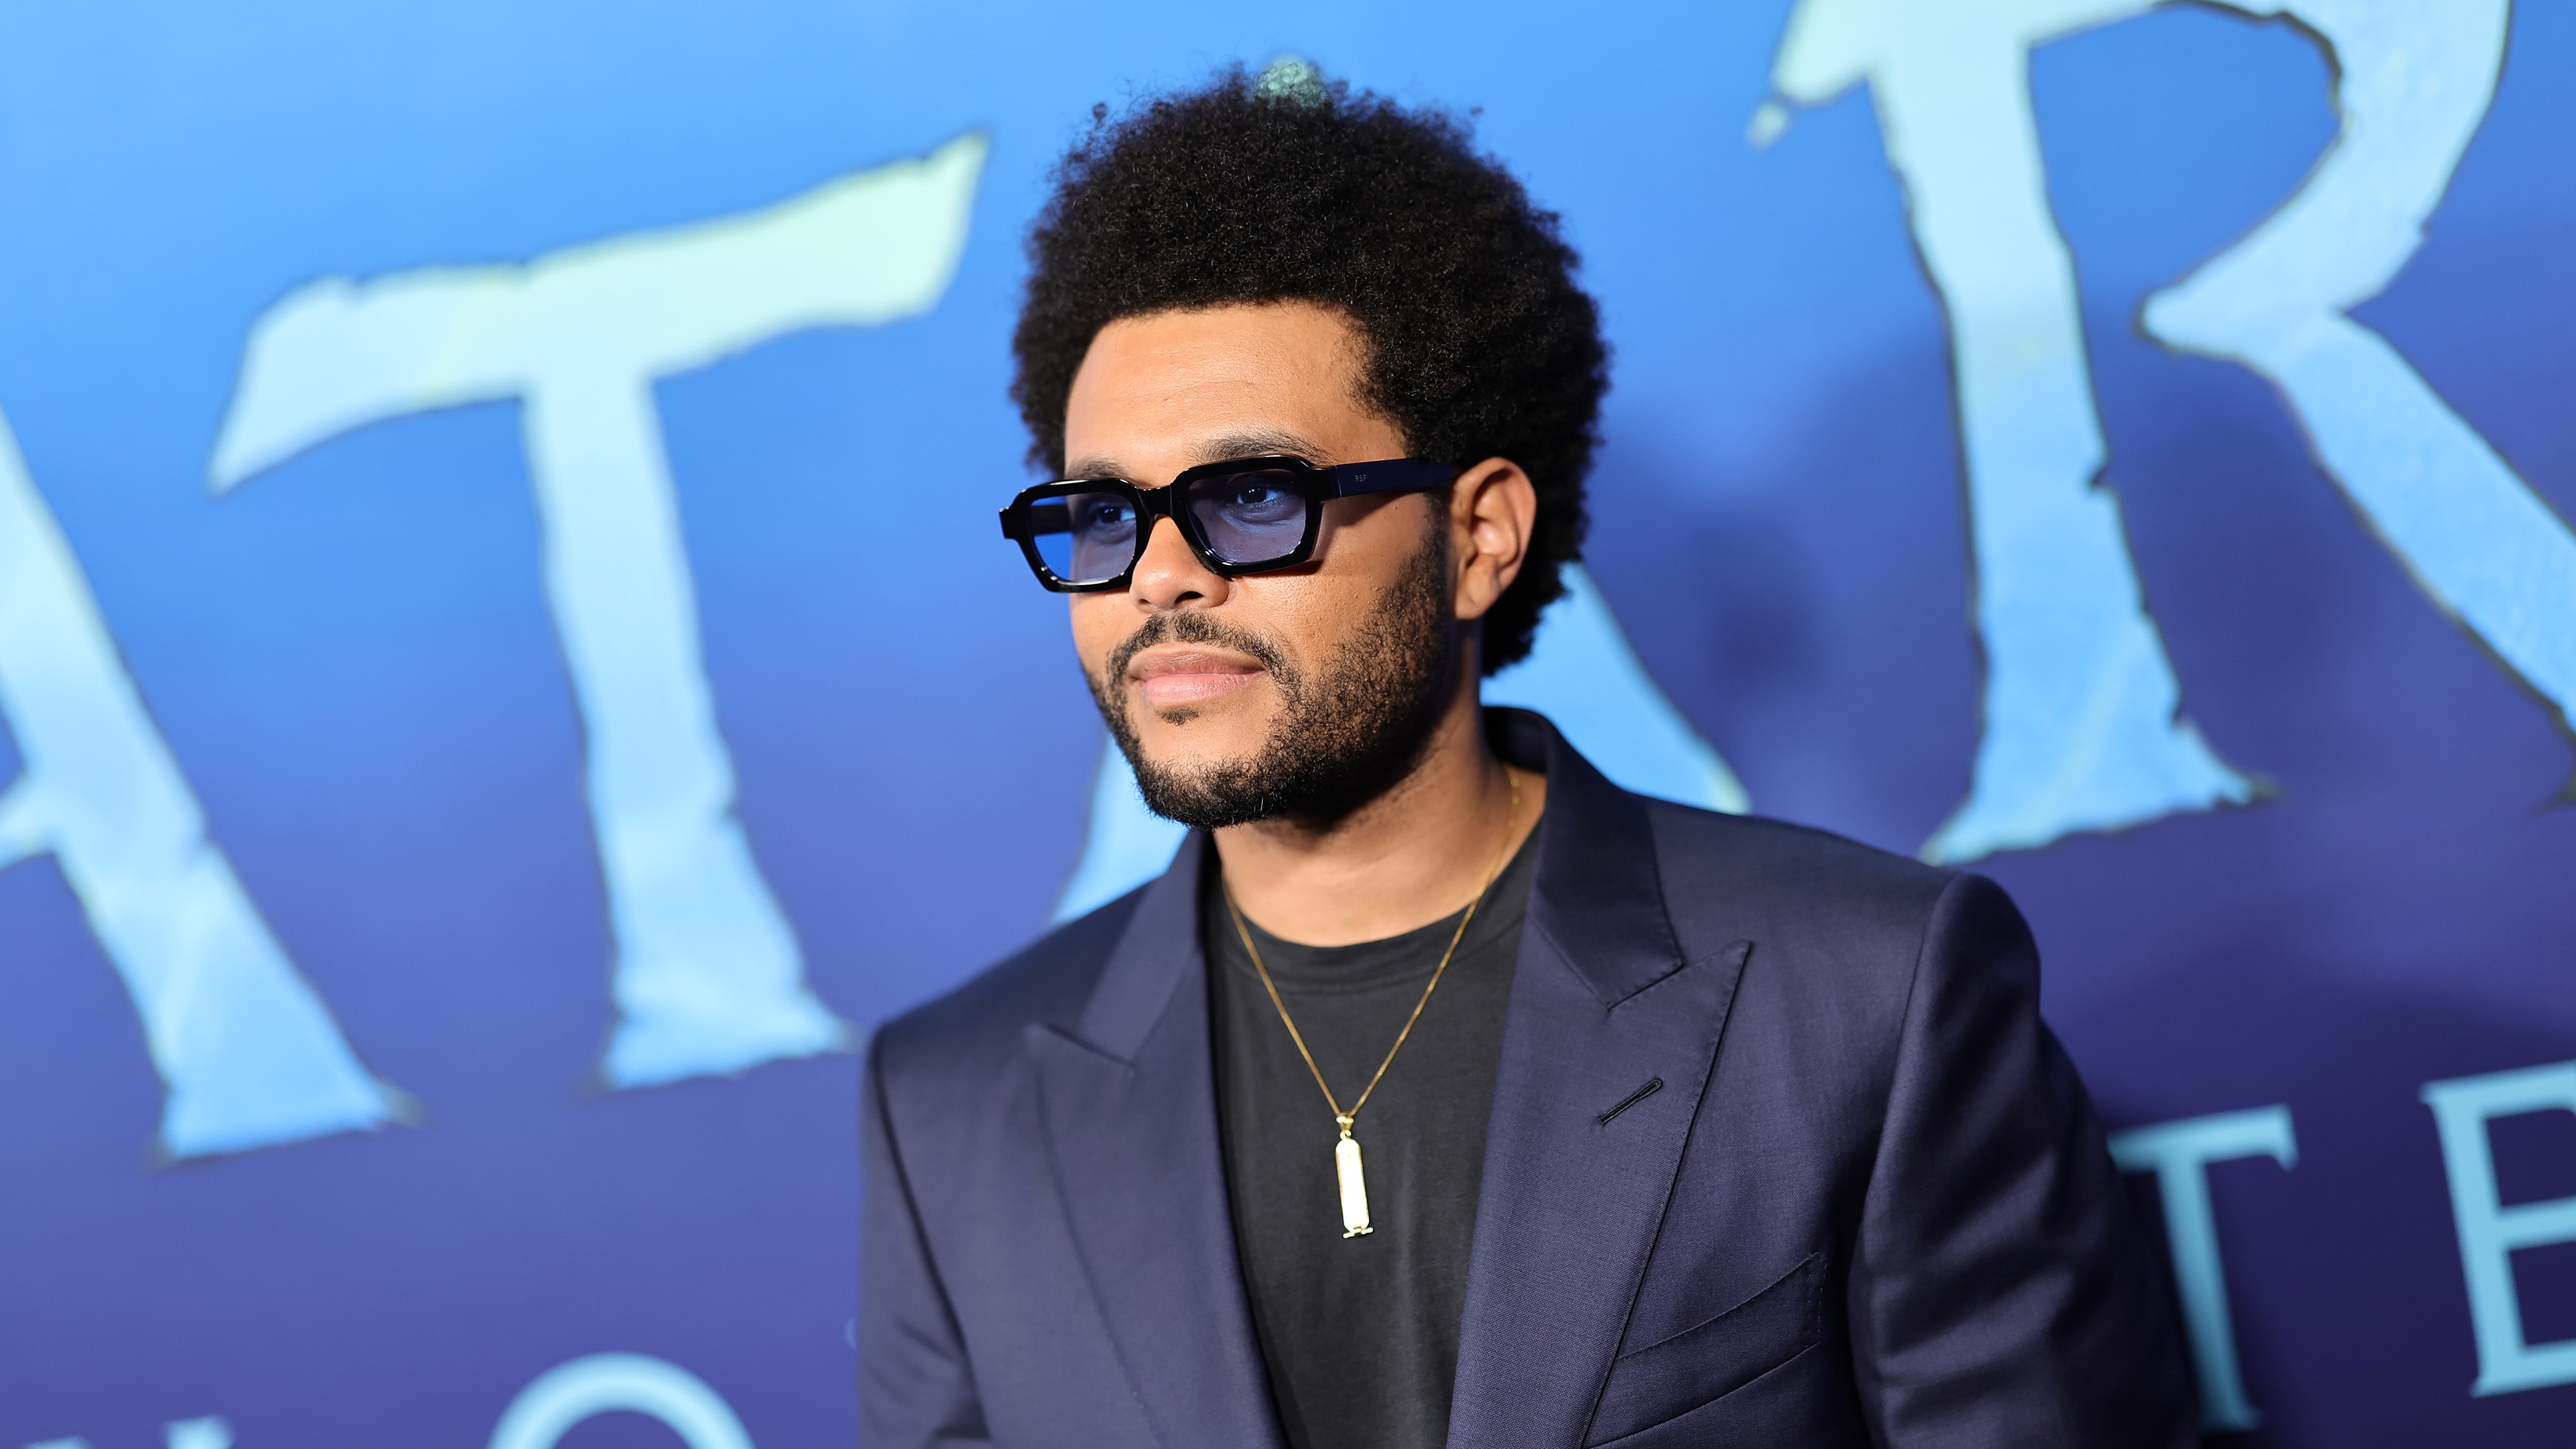 The Weeknd Says He Wants to Go by His Birth Name. Here's Why – NBC